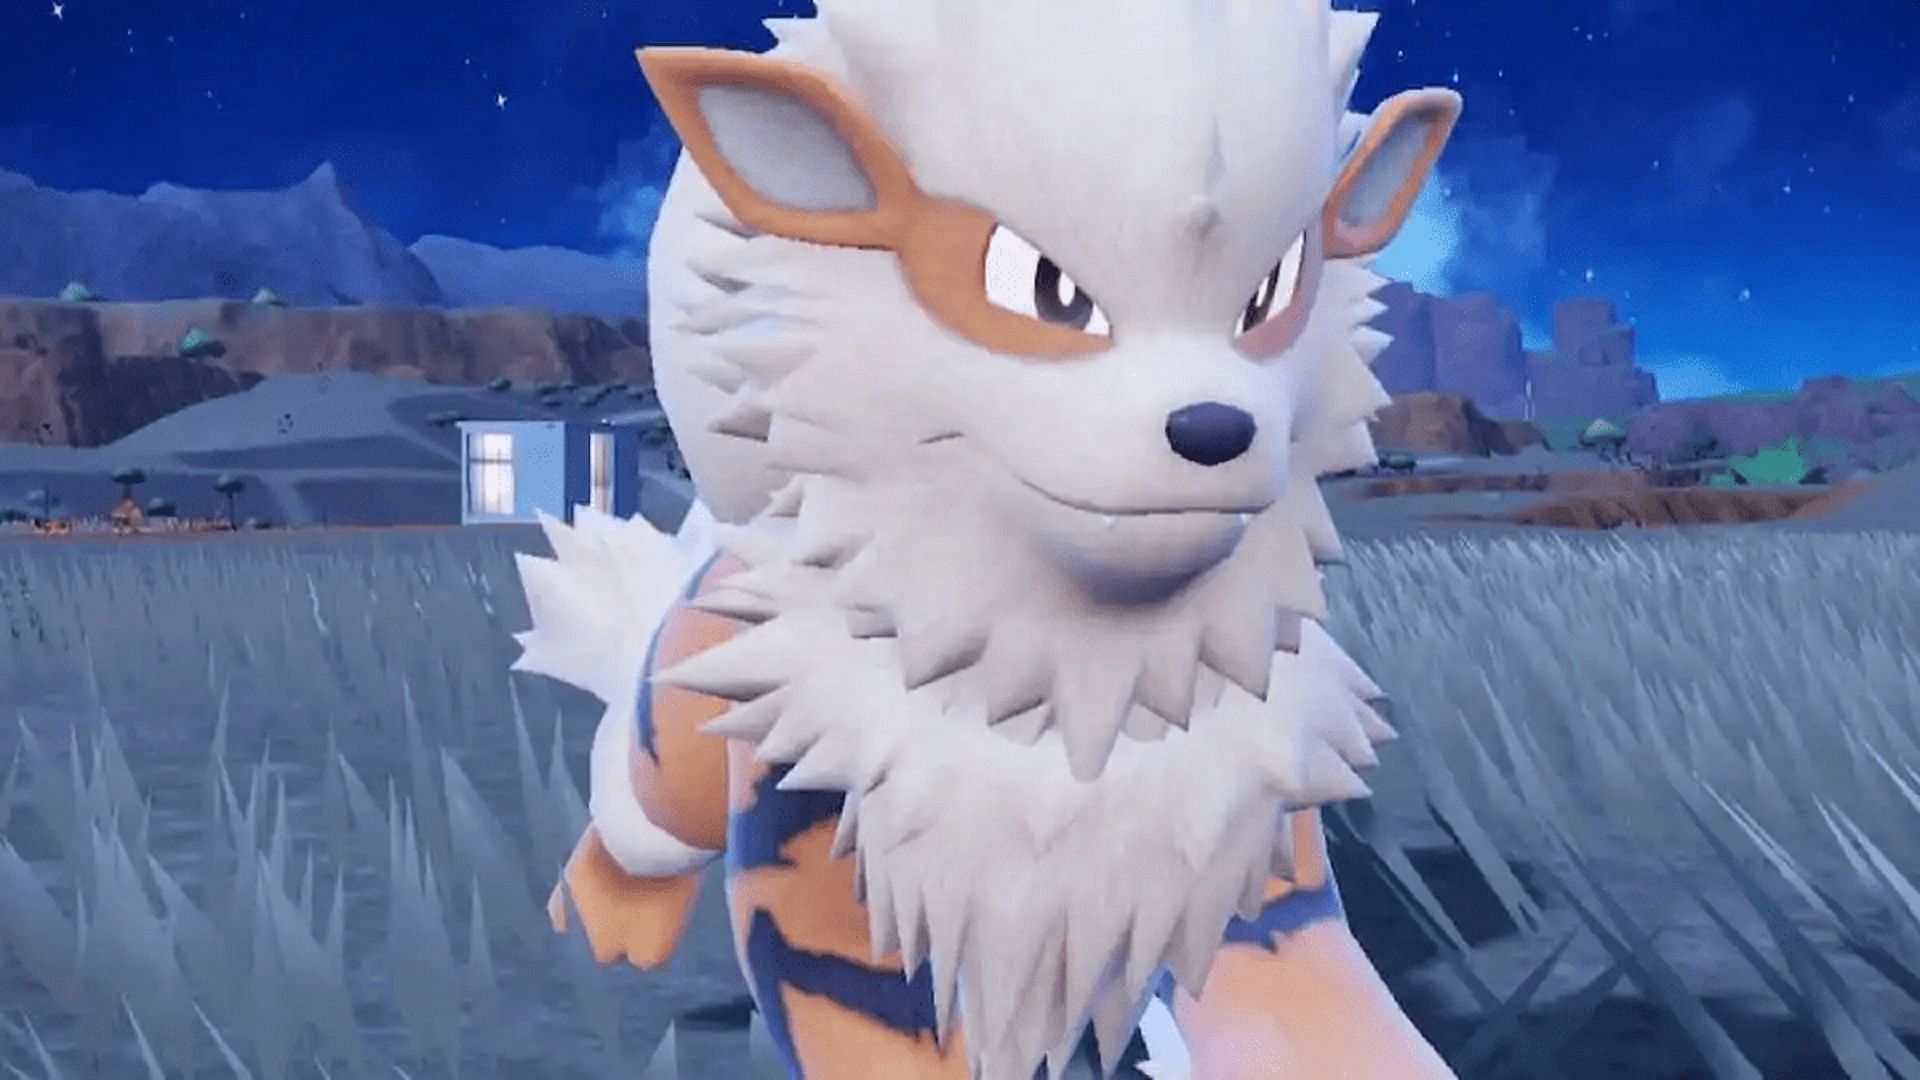 Arcanine has emerged as a top Fire-type Pokemon in Scarlet and Violet